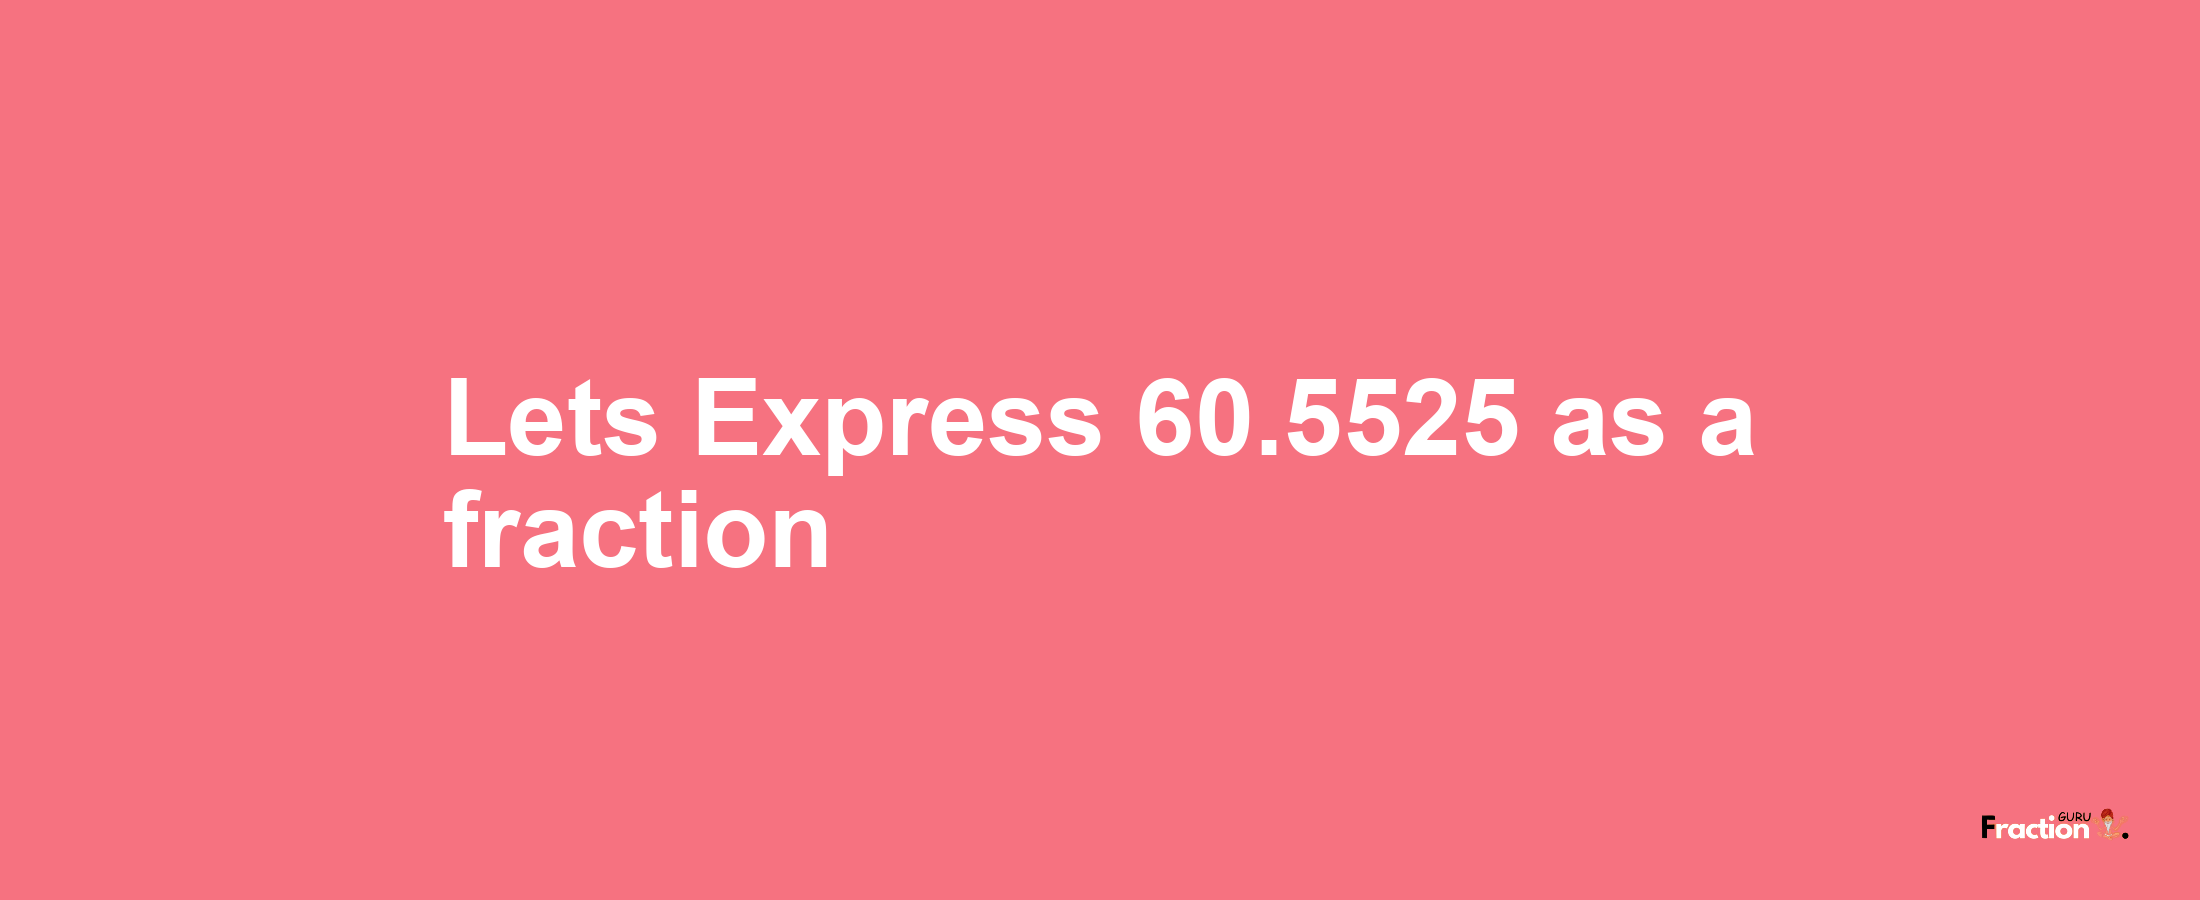 Lets Express 60.5525 as afraction